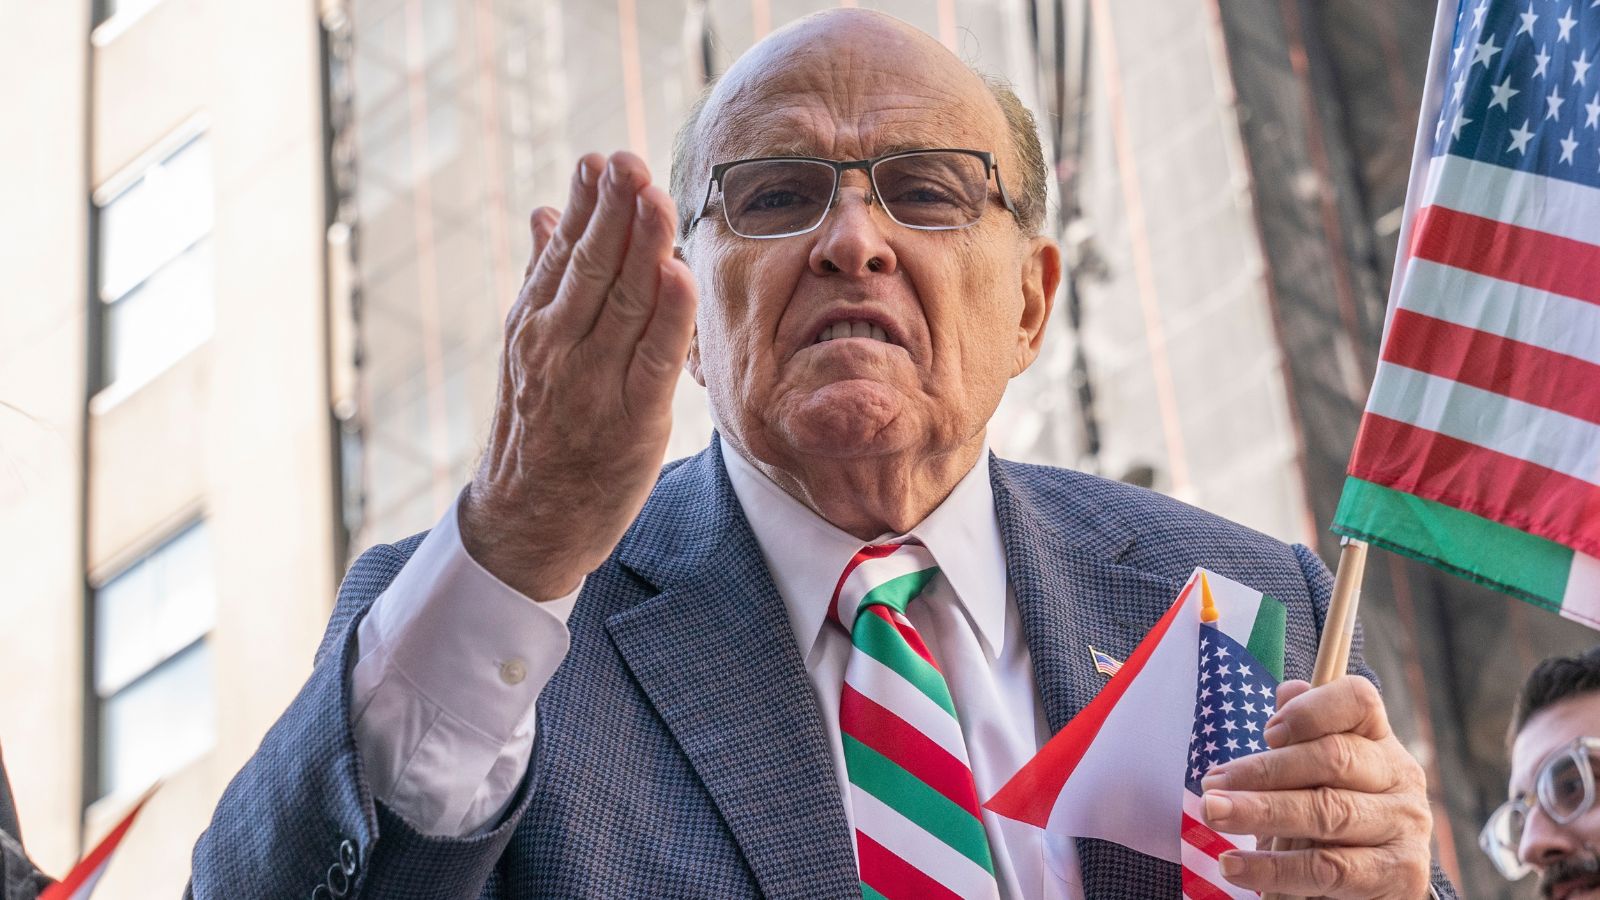 ”Rudy, Bite Your Tongue and Hope for the Best”: Giuliani Criticizes Trump’s Trial Process as “Fascist”